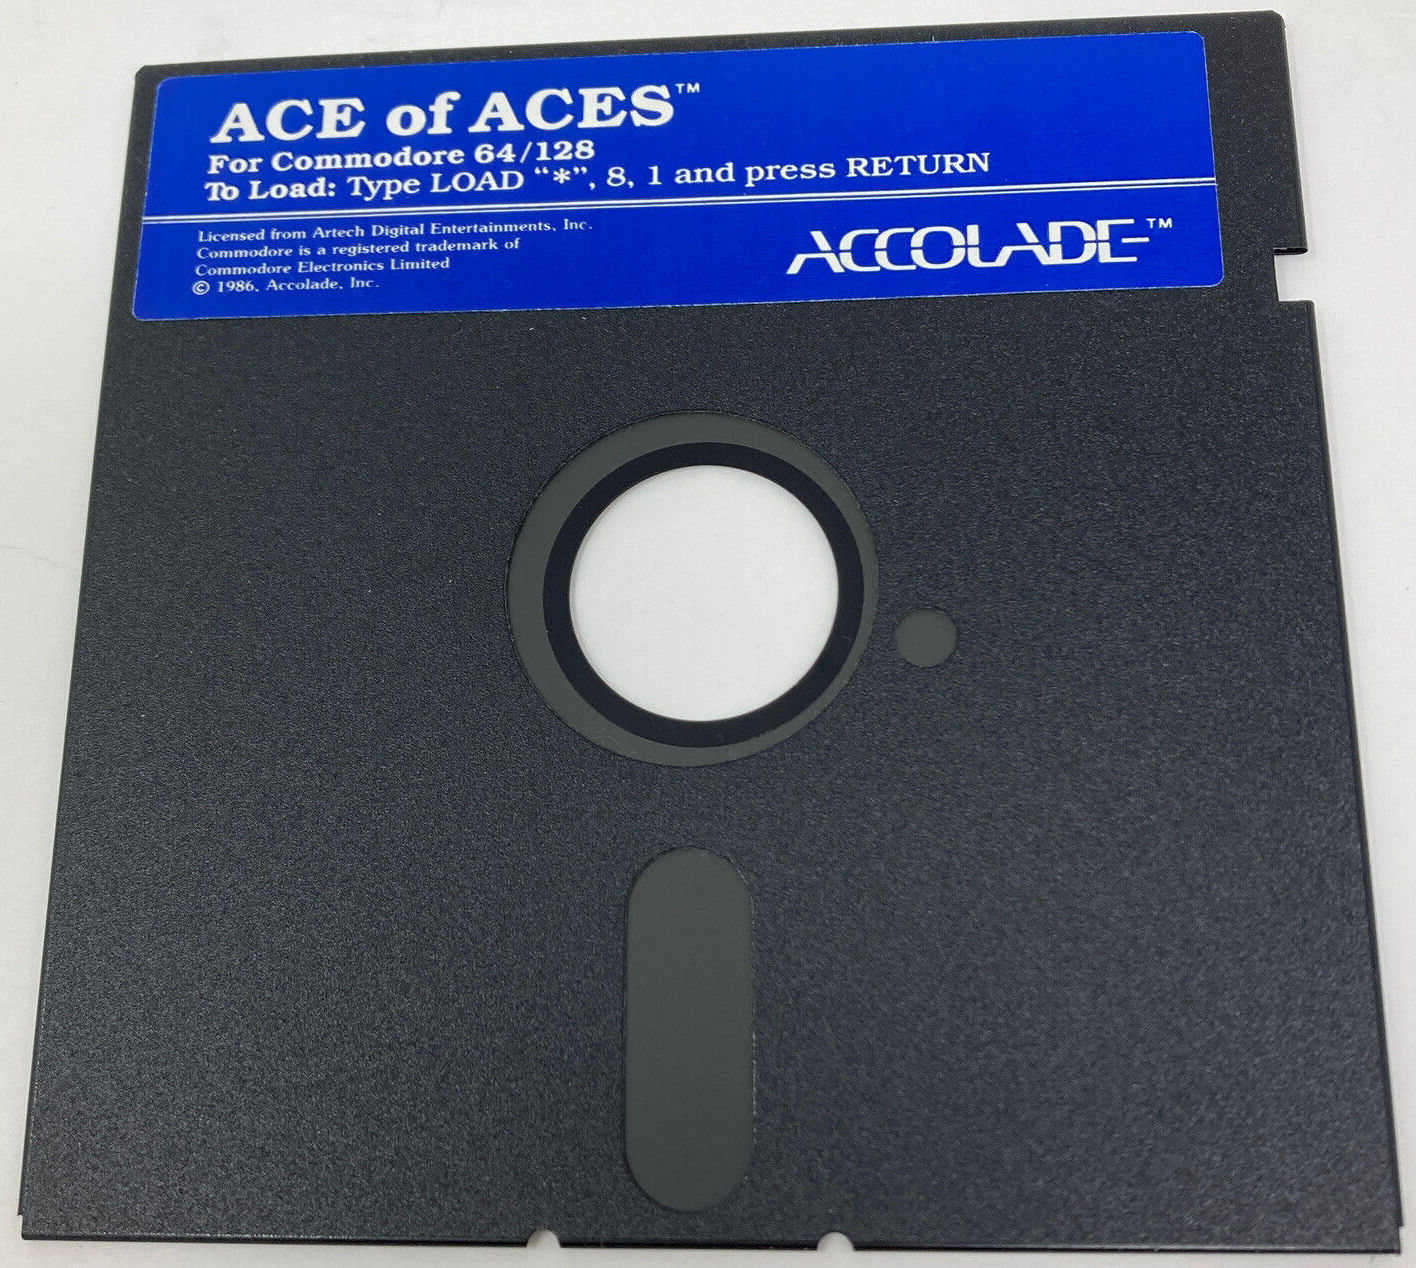 Ace of Aces - Commodore 64